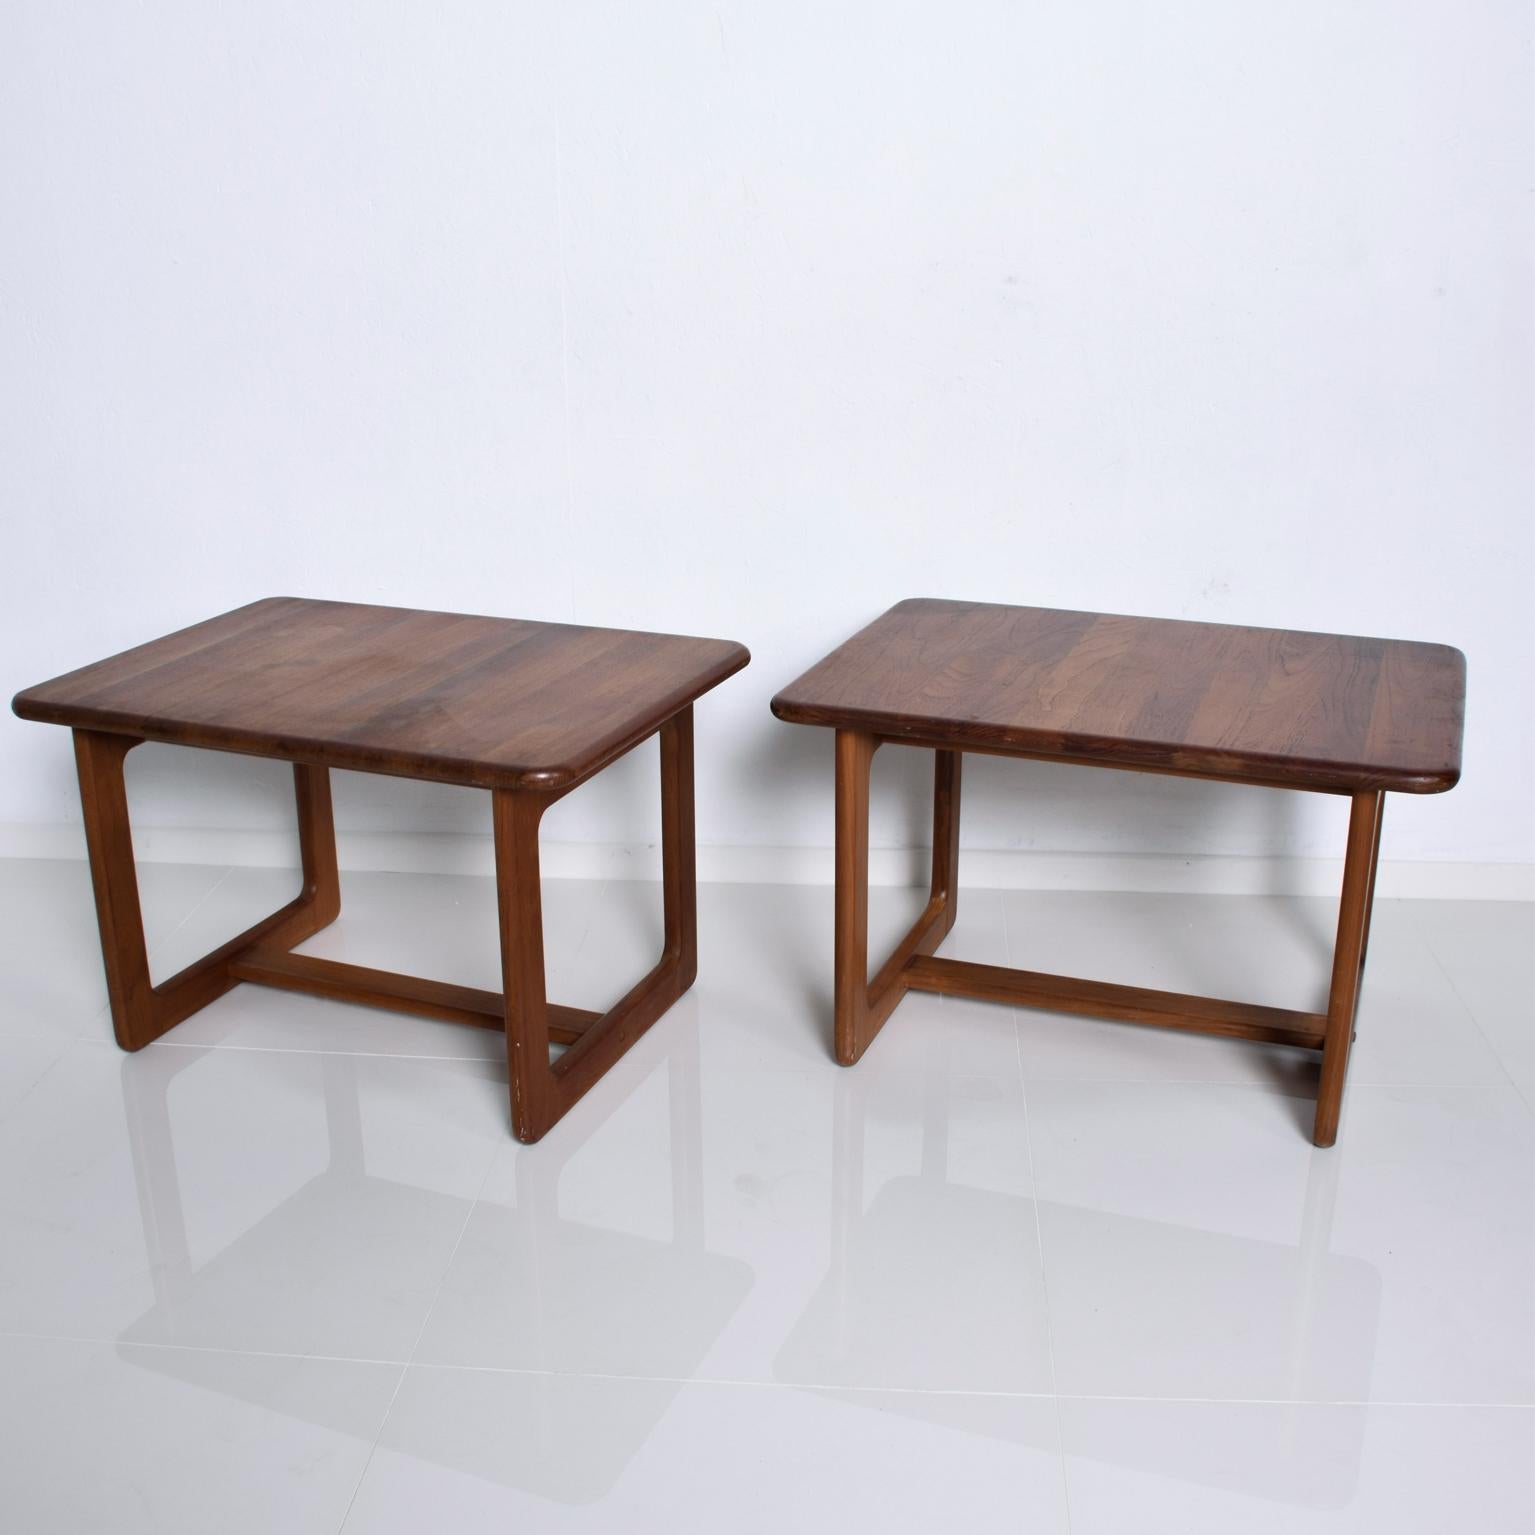 Fabulous Finn Juhl attributed style Organic Modern classic rectangular Side tables in Solid Teakwood. Denmark 1980s
After architect designer Finn Juhl for France and Son.
Simply lovely. Unmarked.
Dimensions: 19 H x 21 .63 D x 29.63 W.
Original